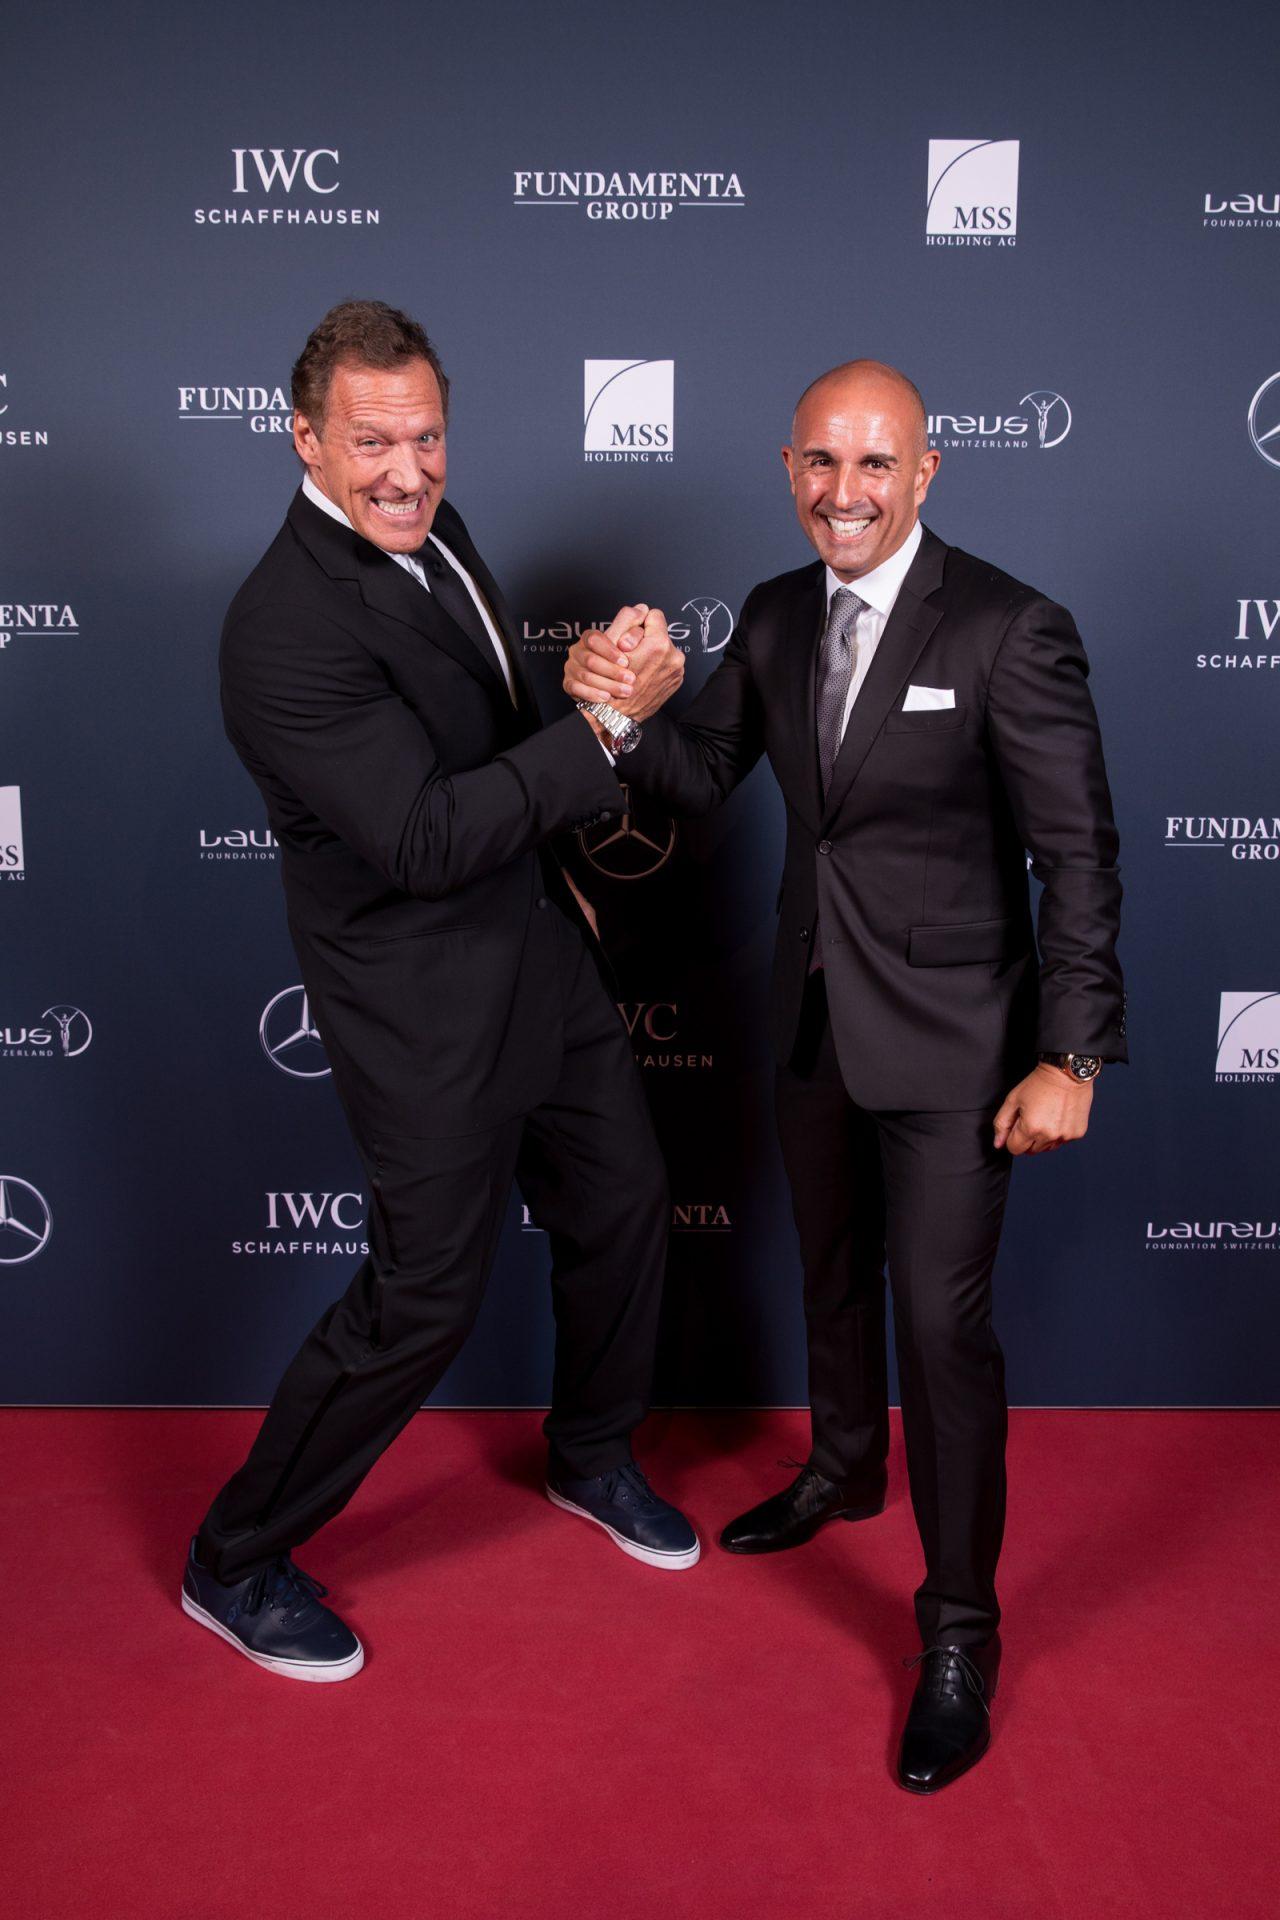 ://www.askthemonsters.com/iwc-laureus-charity-night-2017-what-a-record/